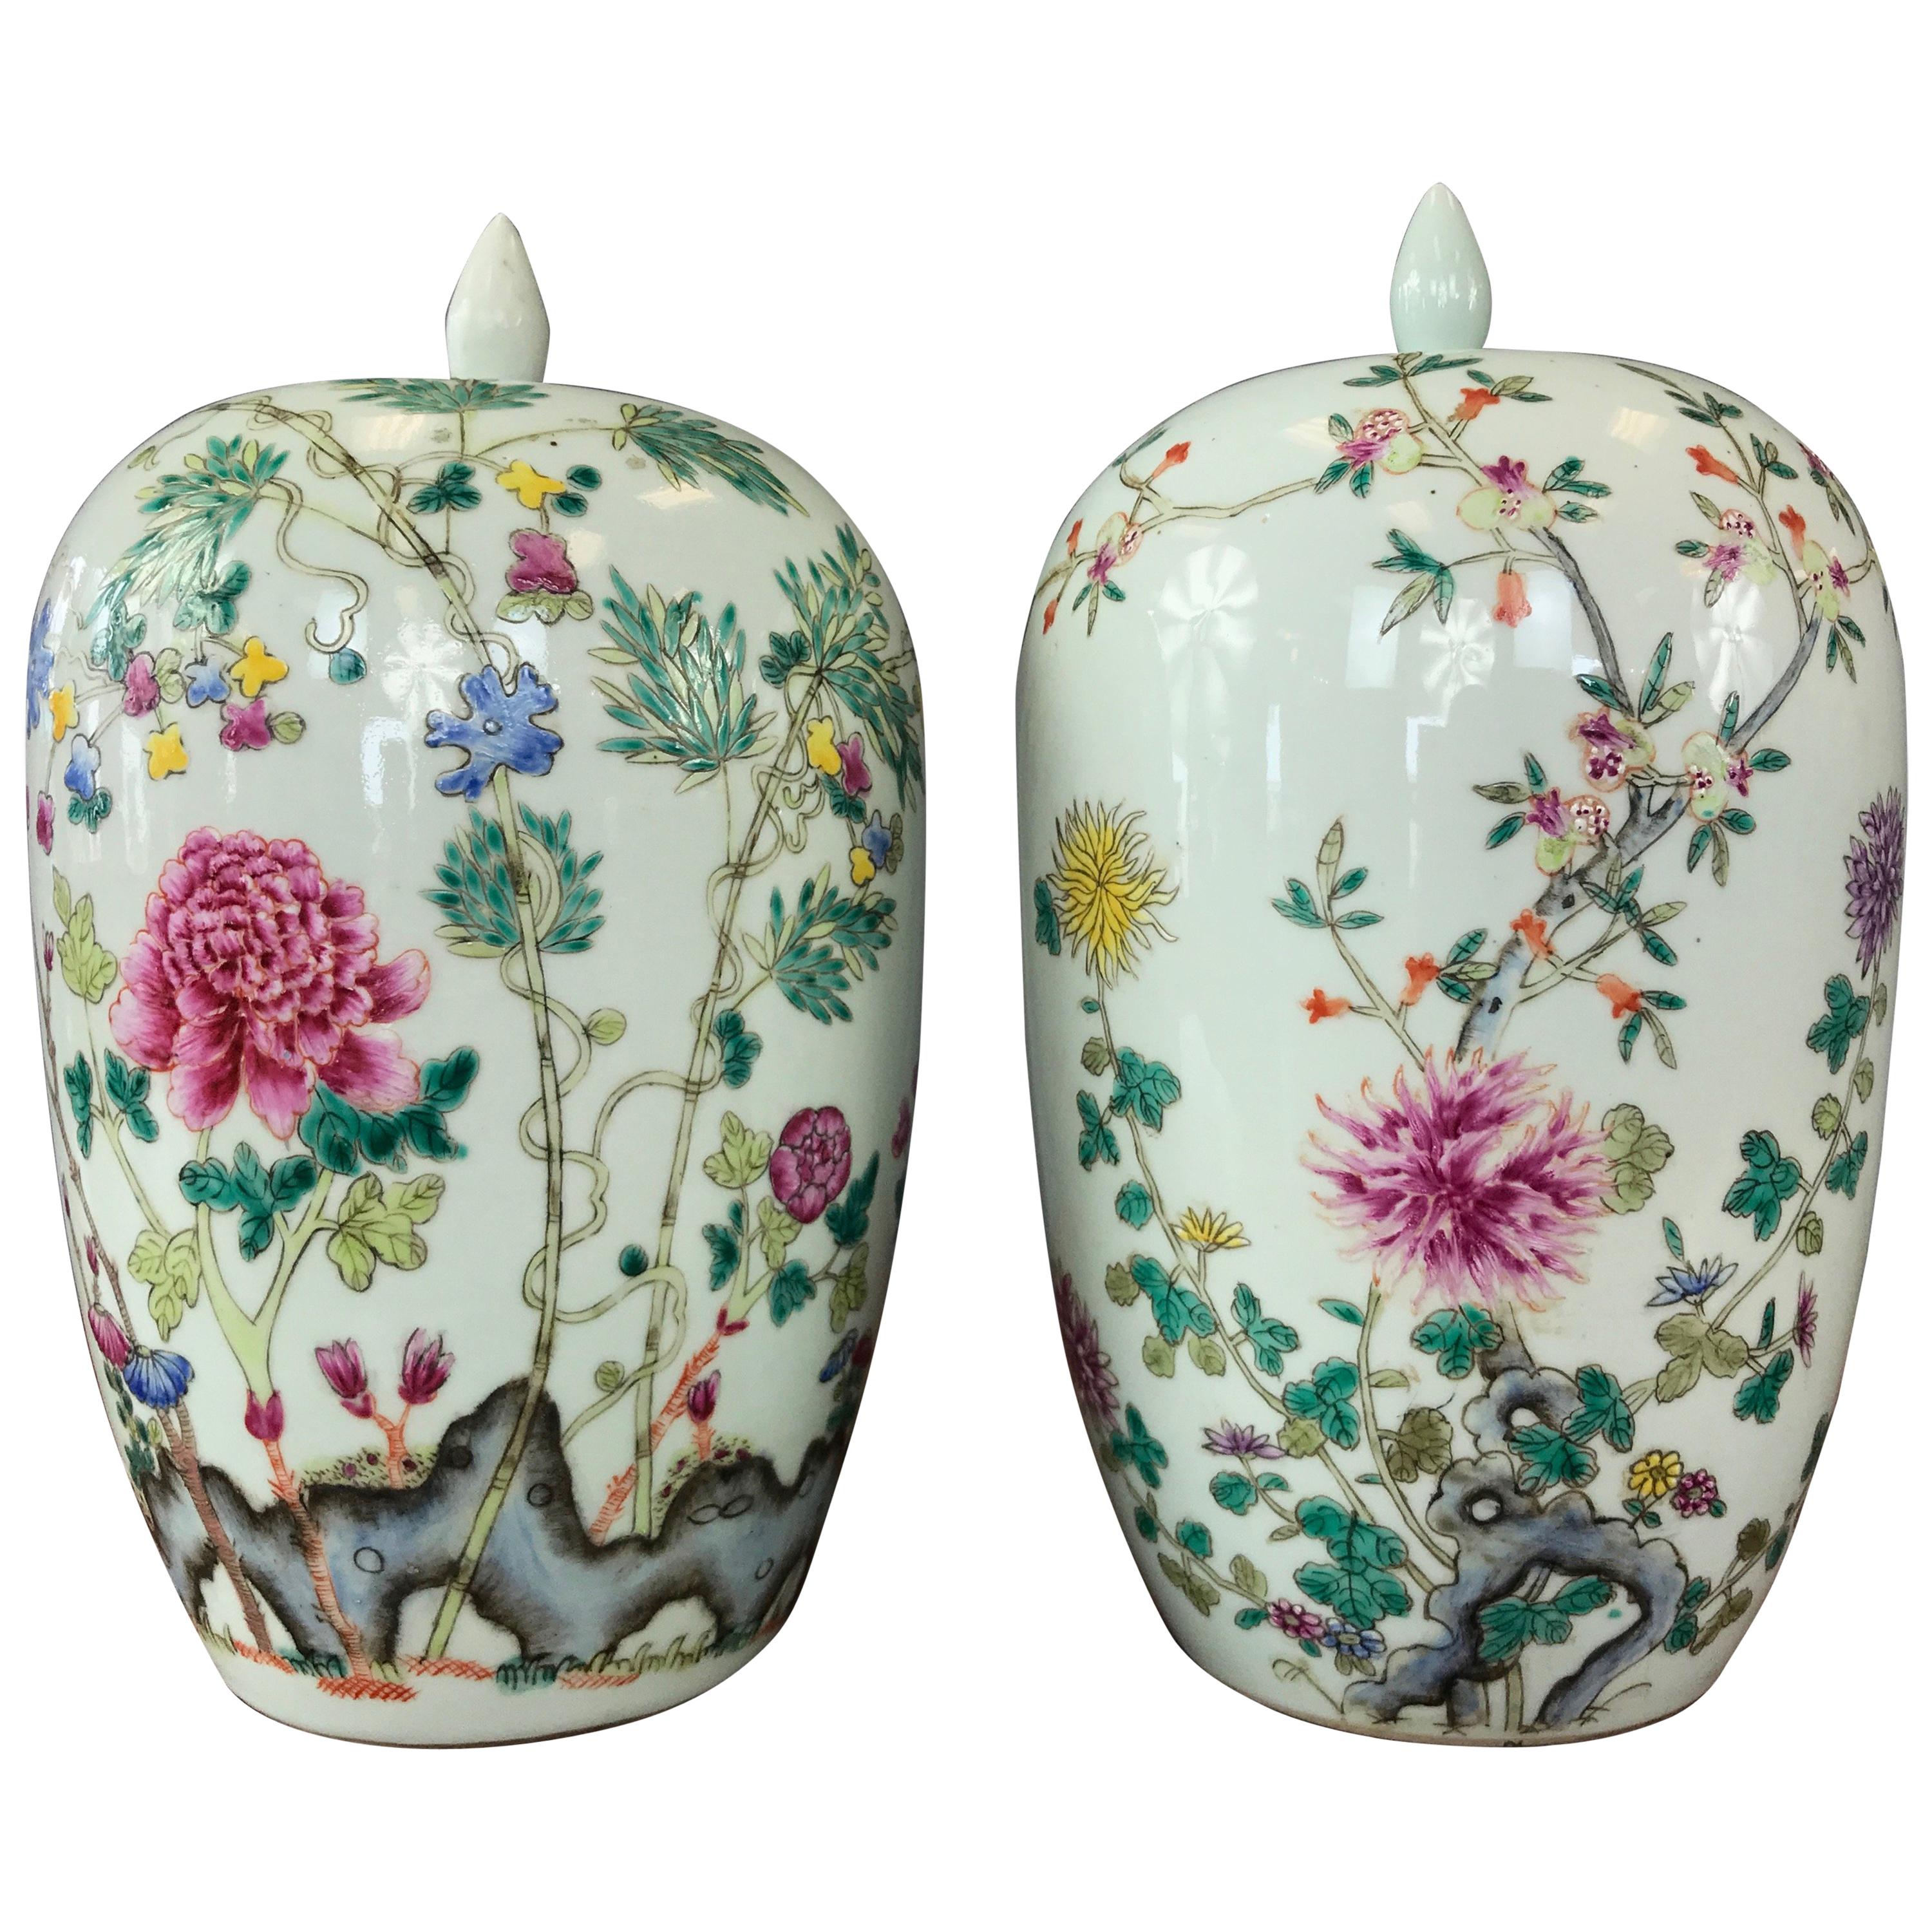 Pair of Fine Chinese Famille Rose Porcelain Covered Vases, Guangxu Period 